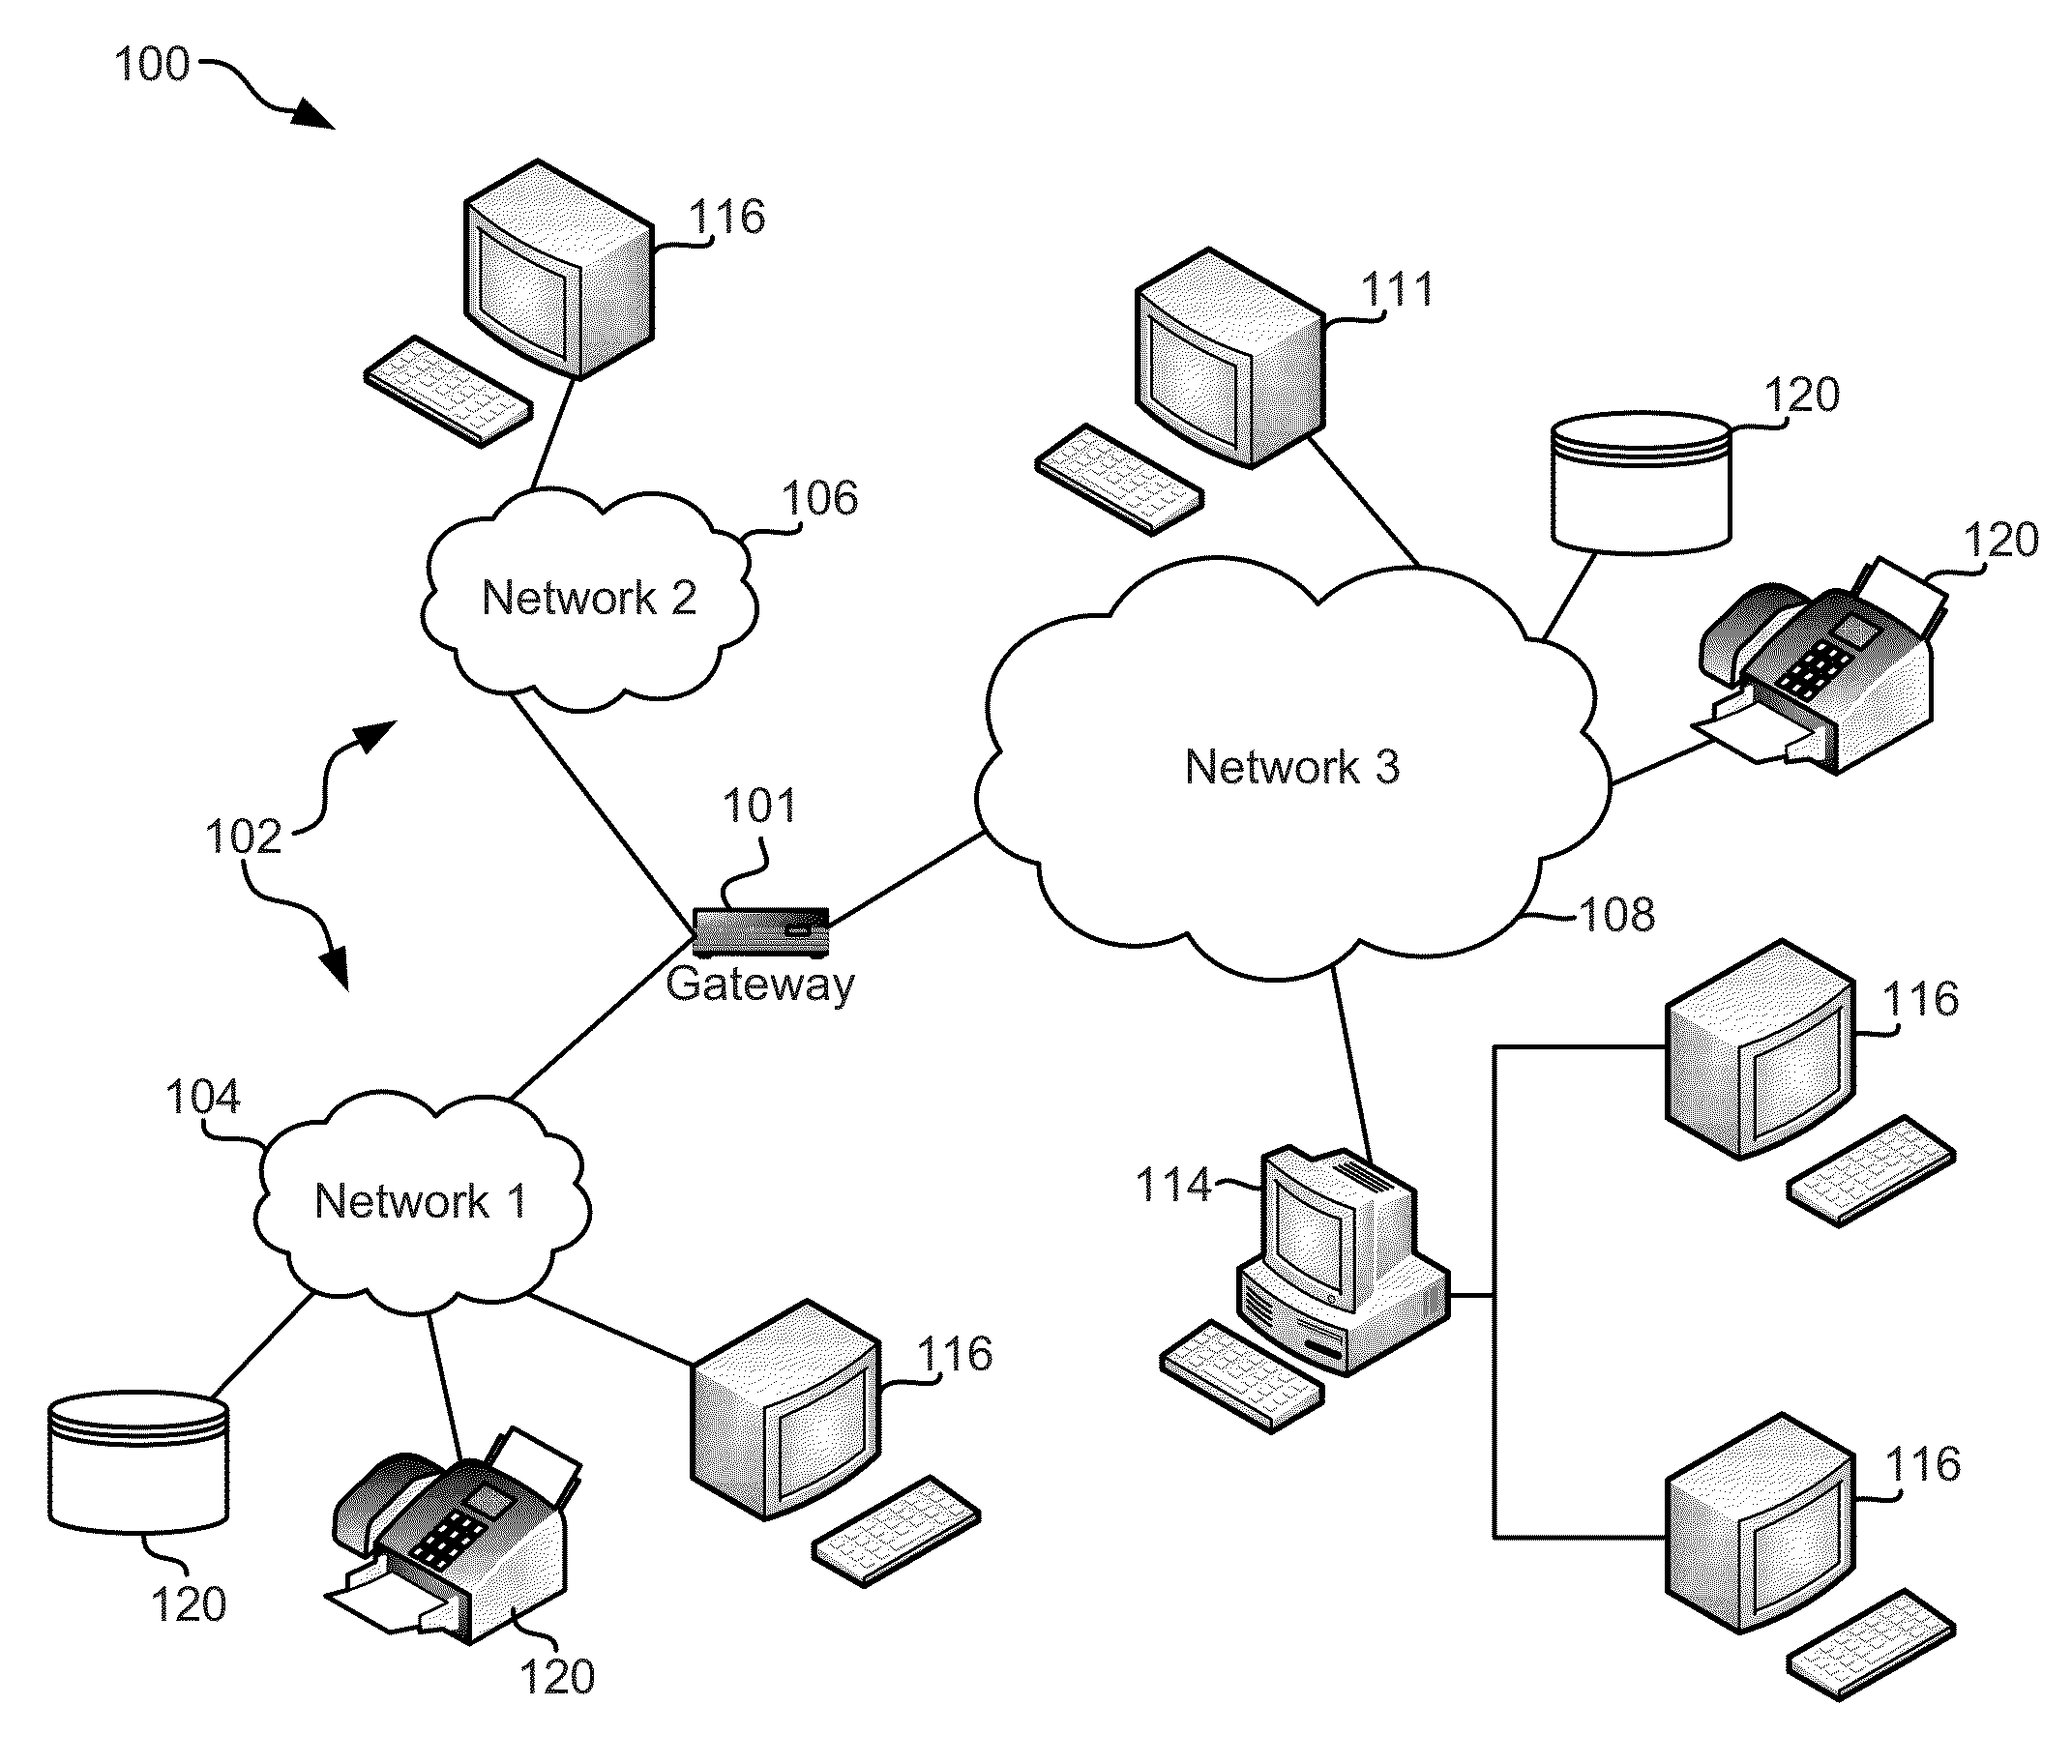 Systems and methods for detecting and classifying objects in video captured using mobile devices